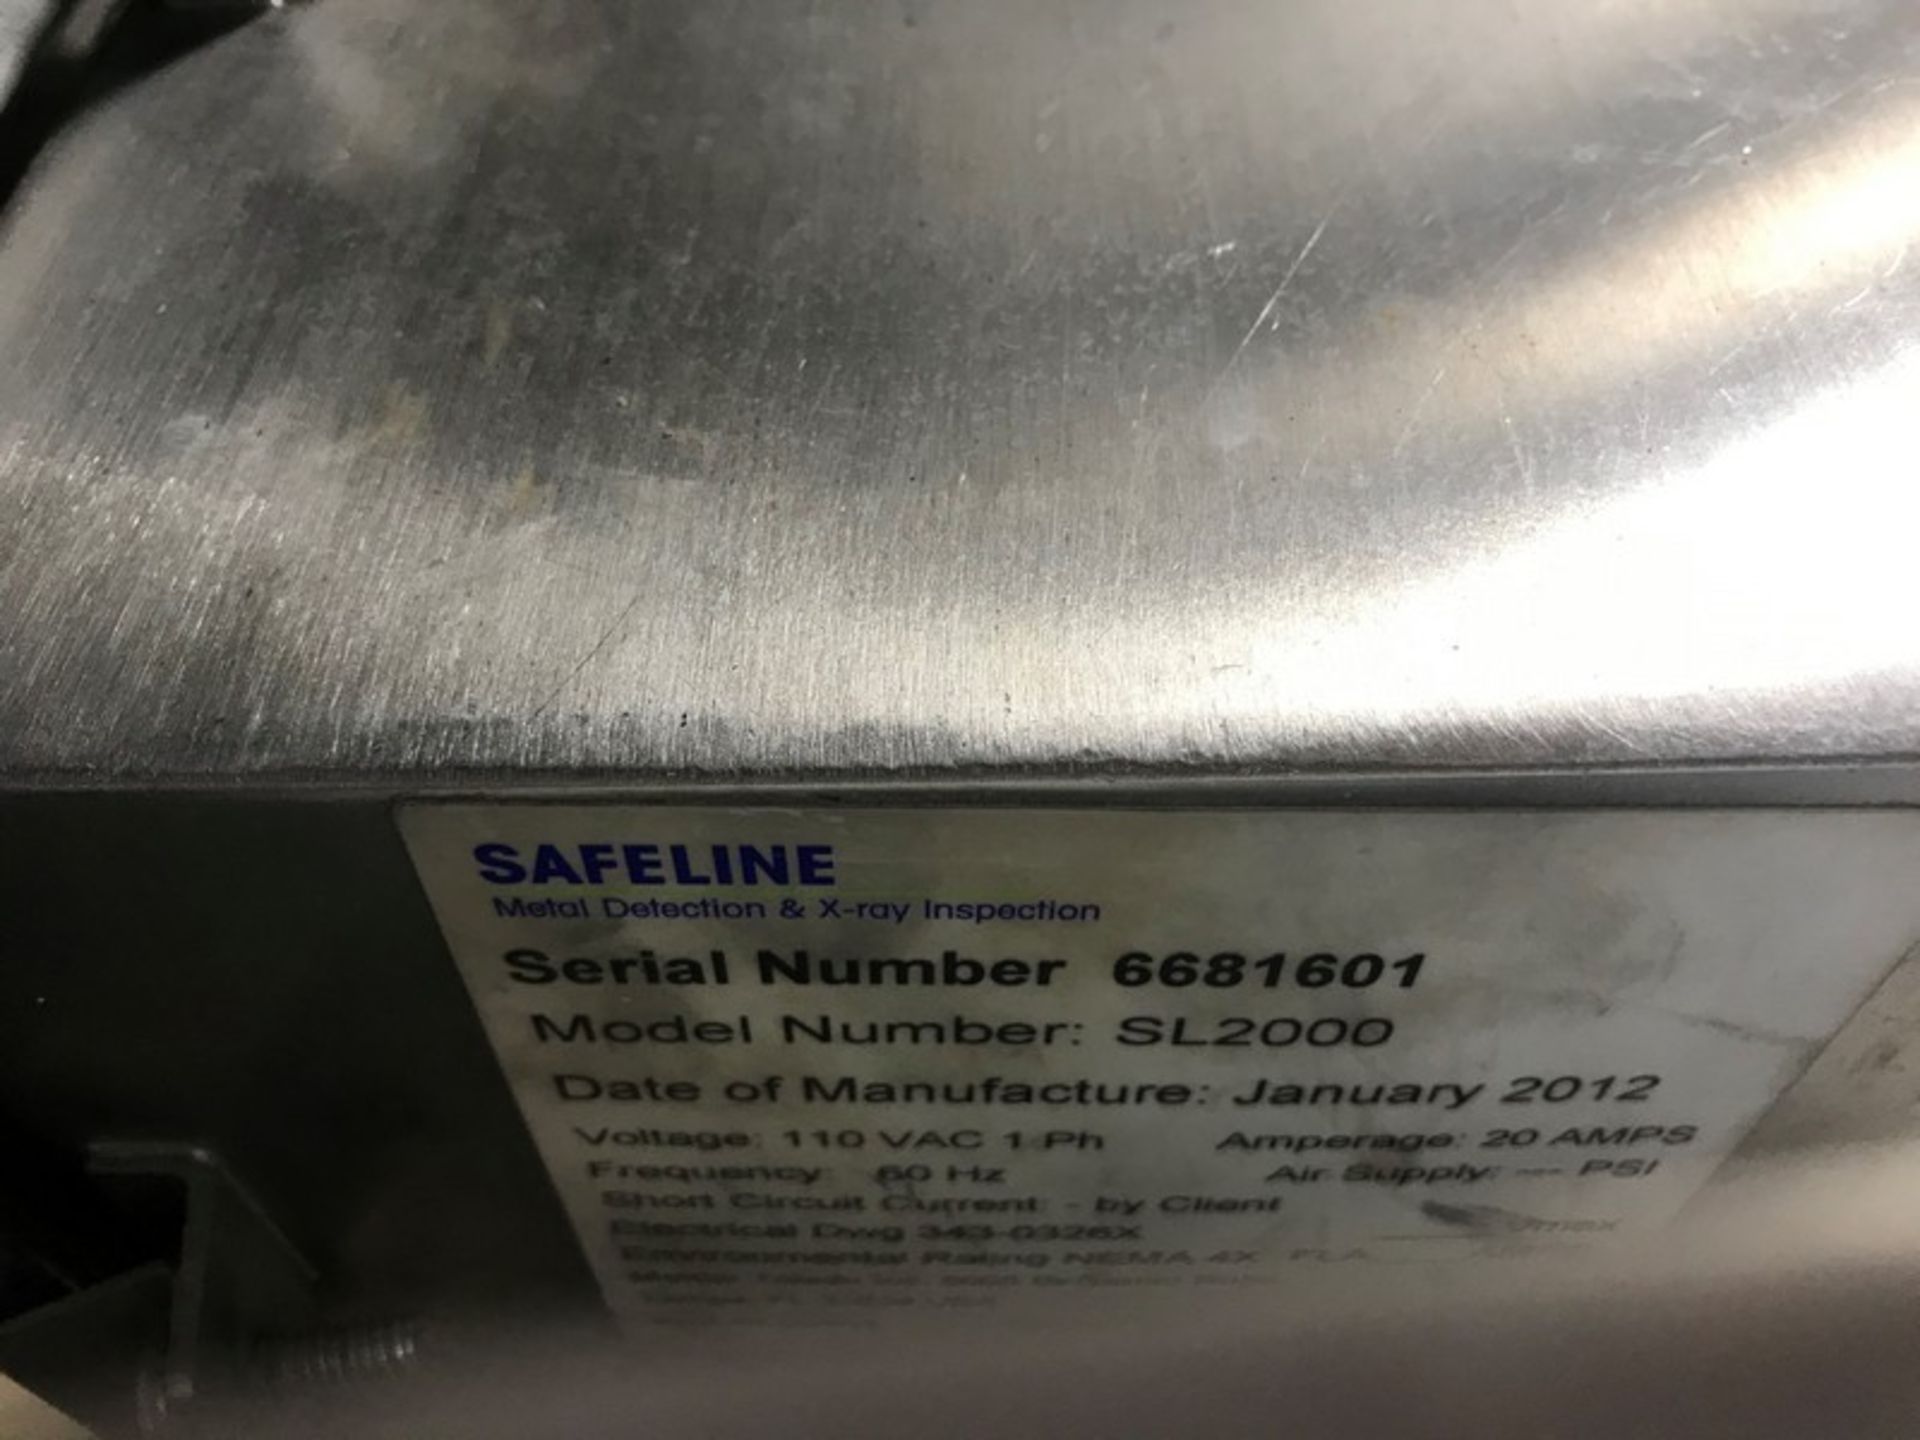 Safeline Metal Detector, Model SL2000, S/N 6681601 with Aprox. 11.75" x 25.5" Product Opening, - Image 4 of 4